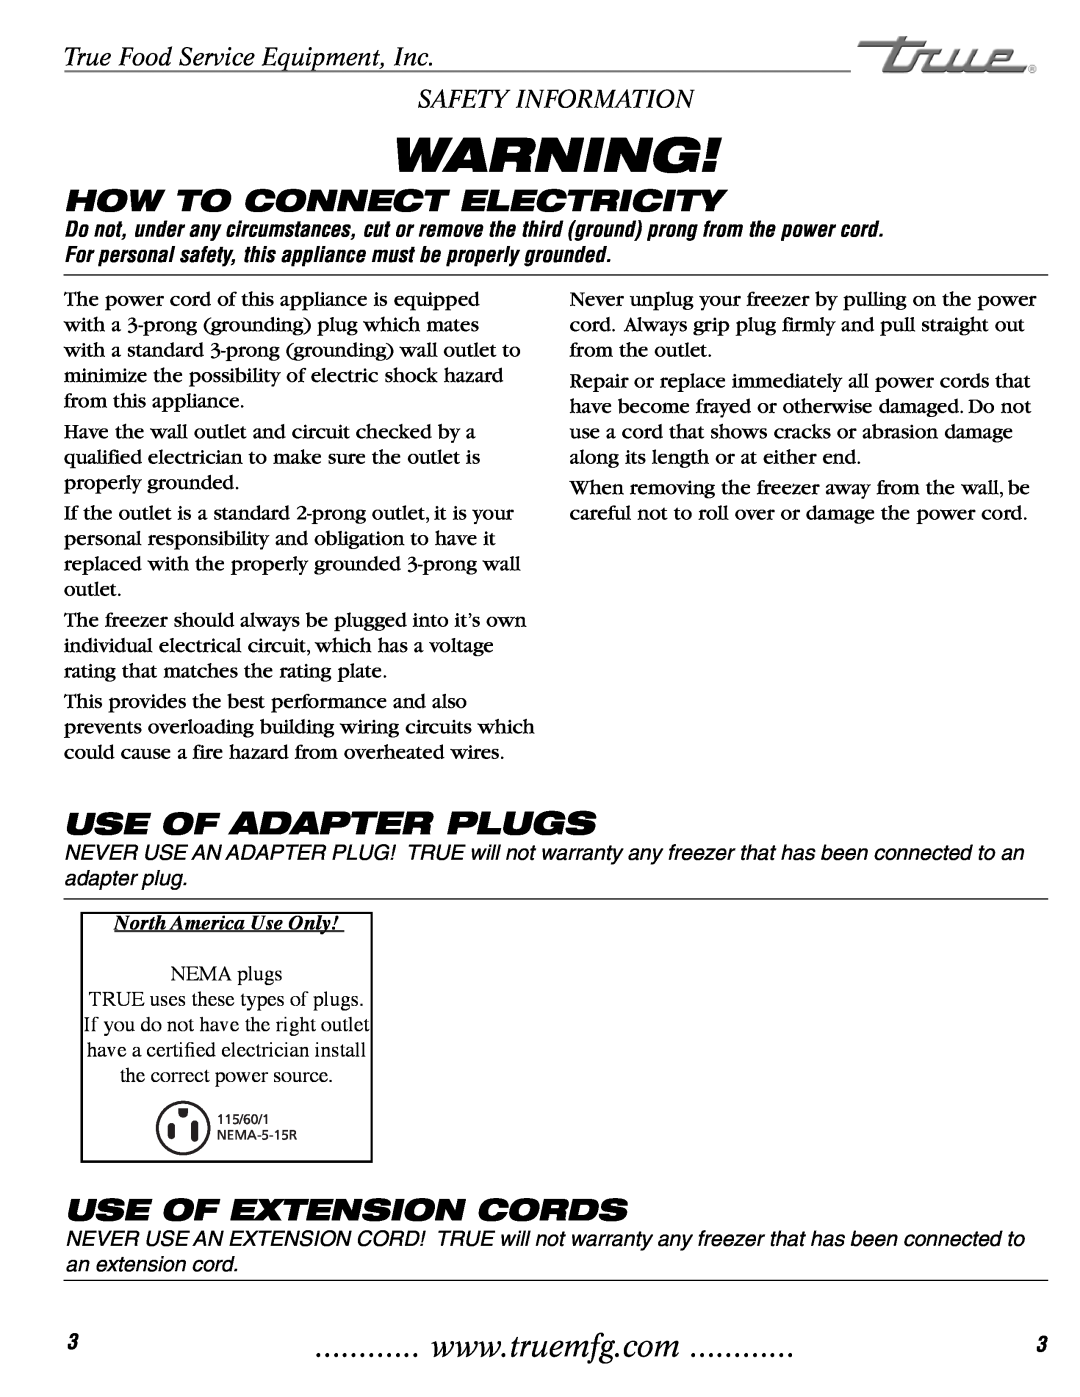 True Manufacturing Company THDC-6, TDC-47 Use Of Adapter Plugs, How To Connect Electricity, Use Of Extension Cords 